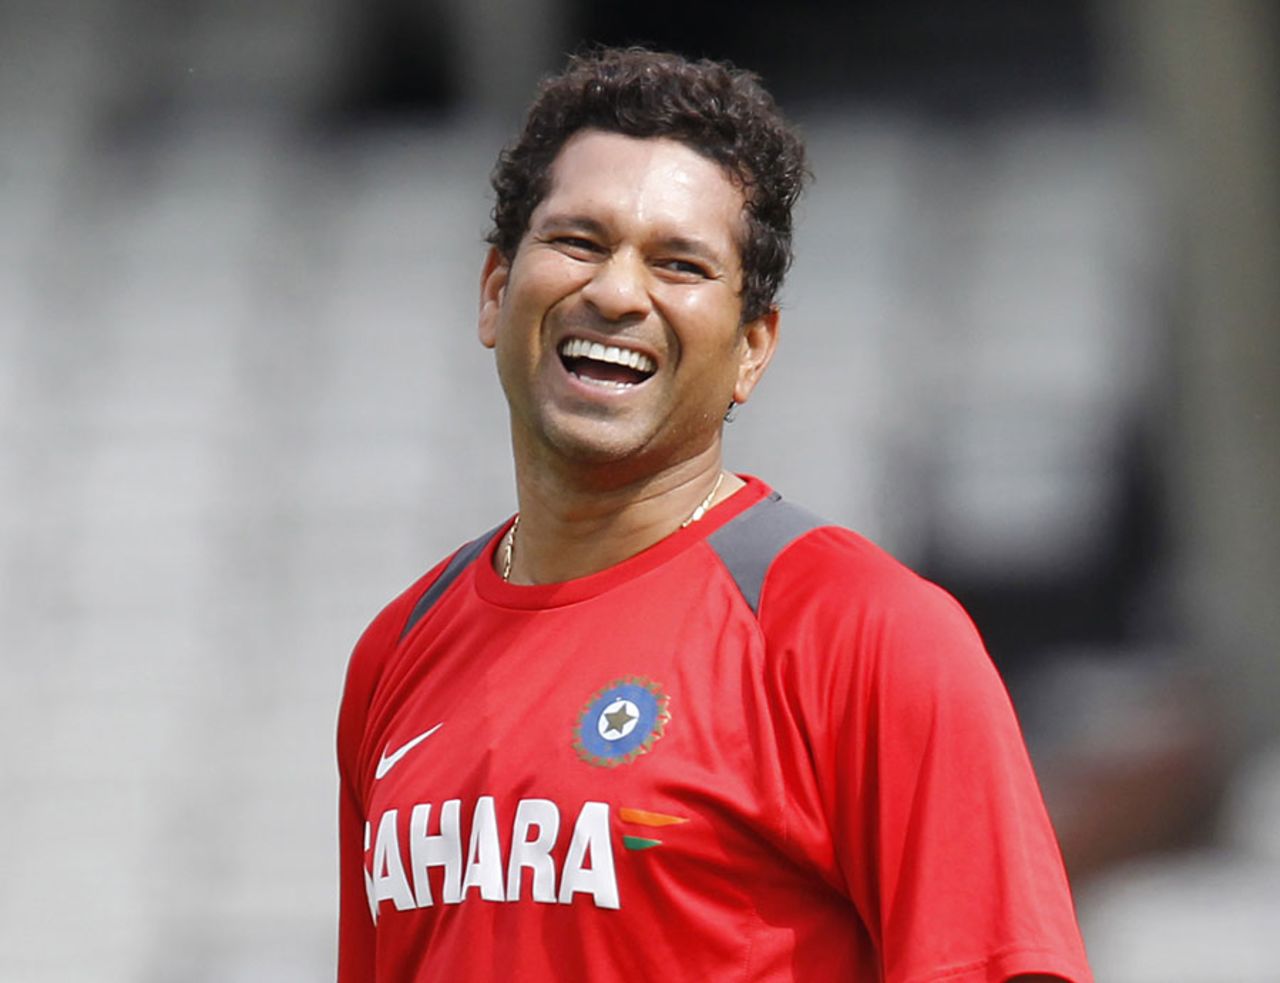 Still smiling: Sachin Tendulkar was in good spirits as he prepared for the final Test, The Oval, August 17, 2011